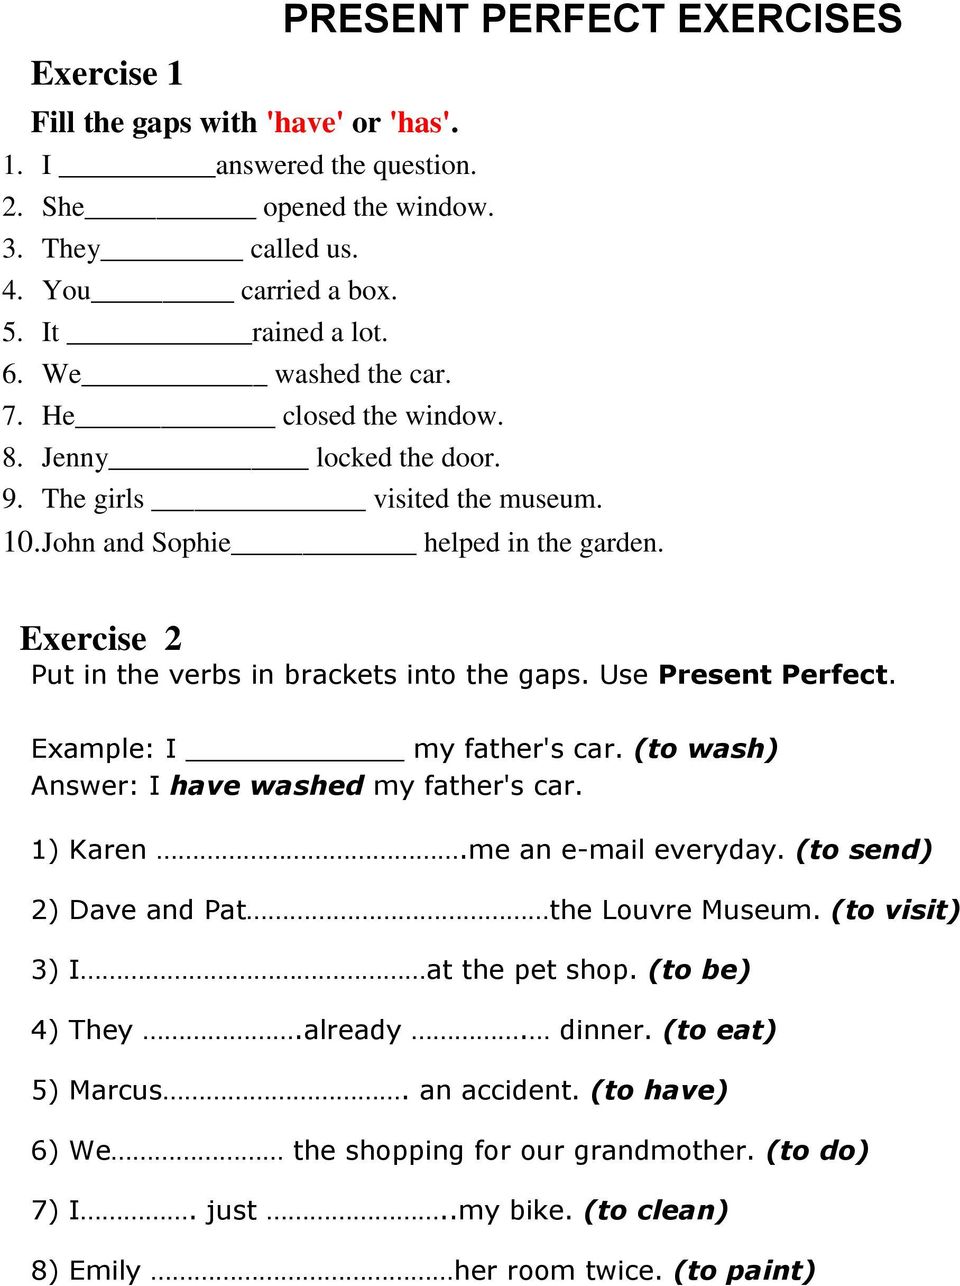 Present perfect 5 класс упражнения. Present perfect negative упражнения. Present perfect упражнения 6 класс Worksheets. Present perfect simple Elementary. Упражнение 5 класс present perfect have has.